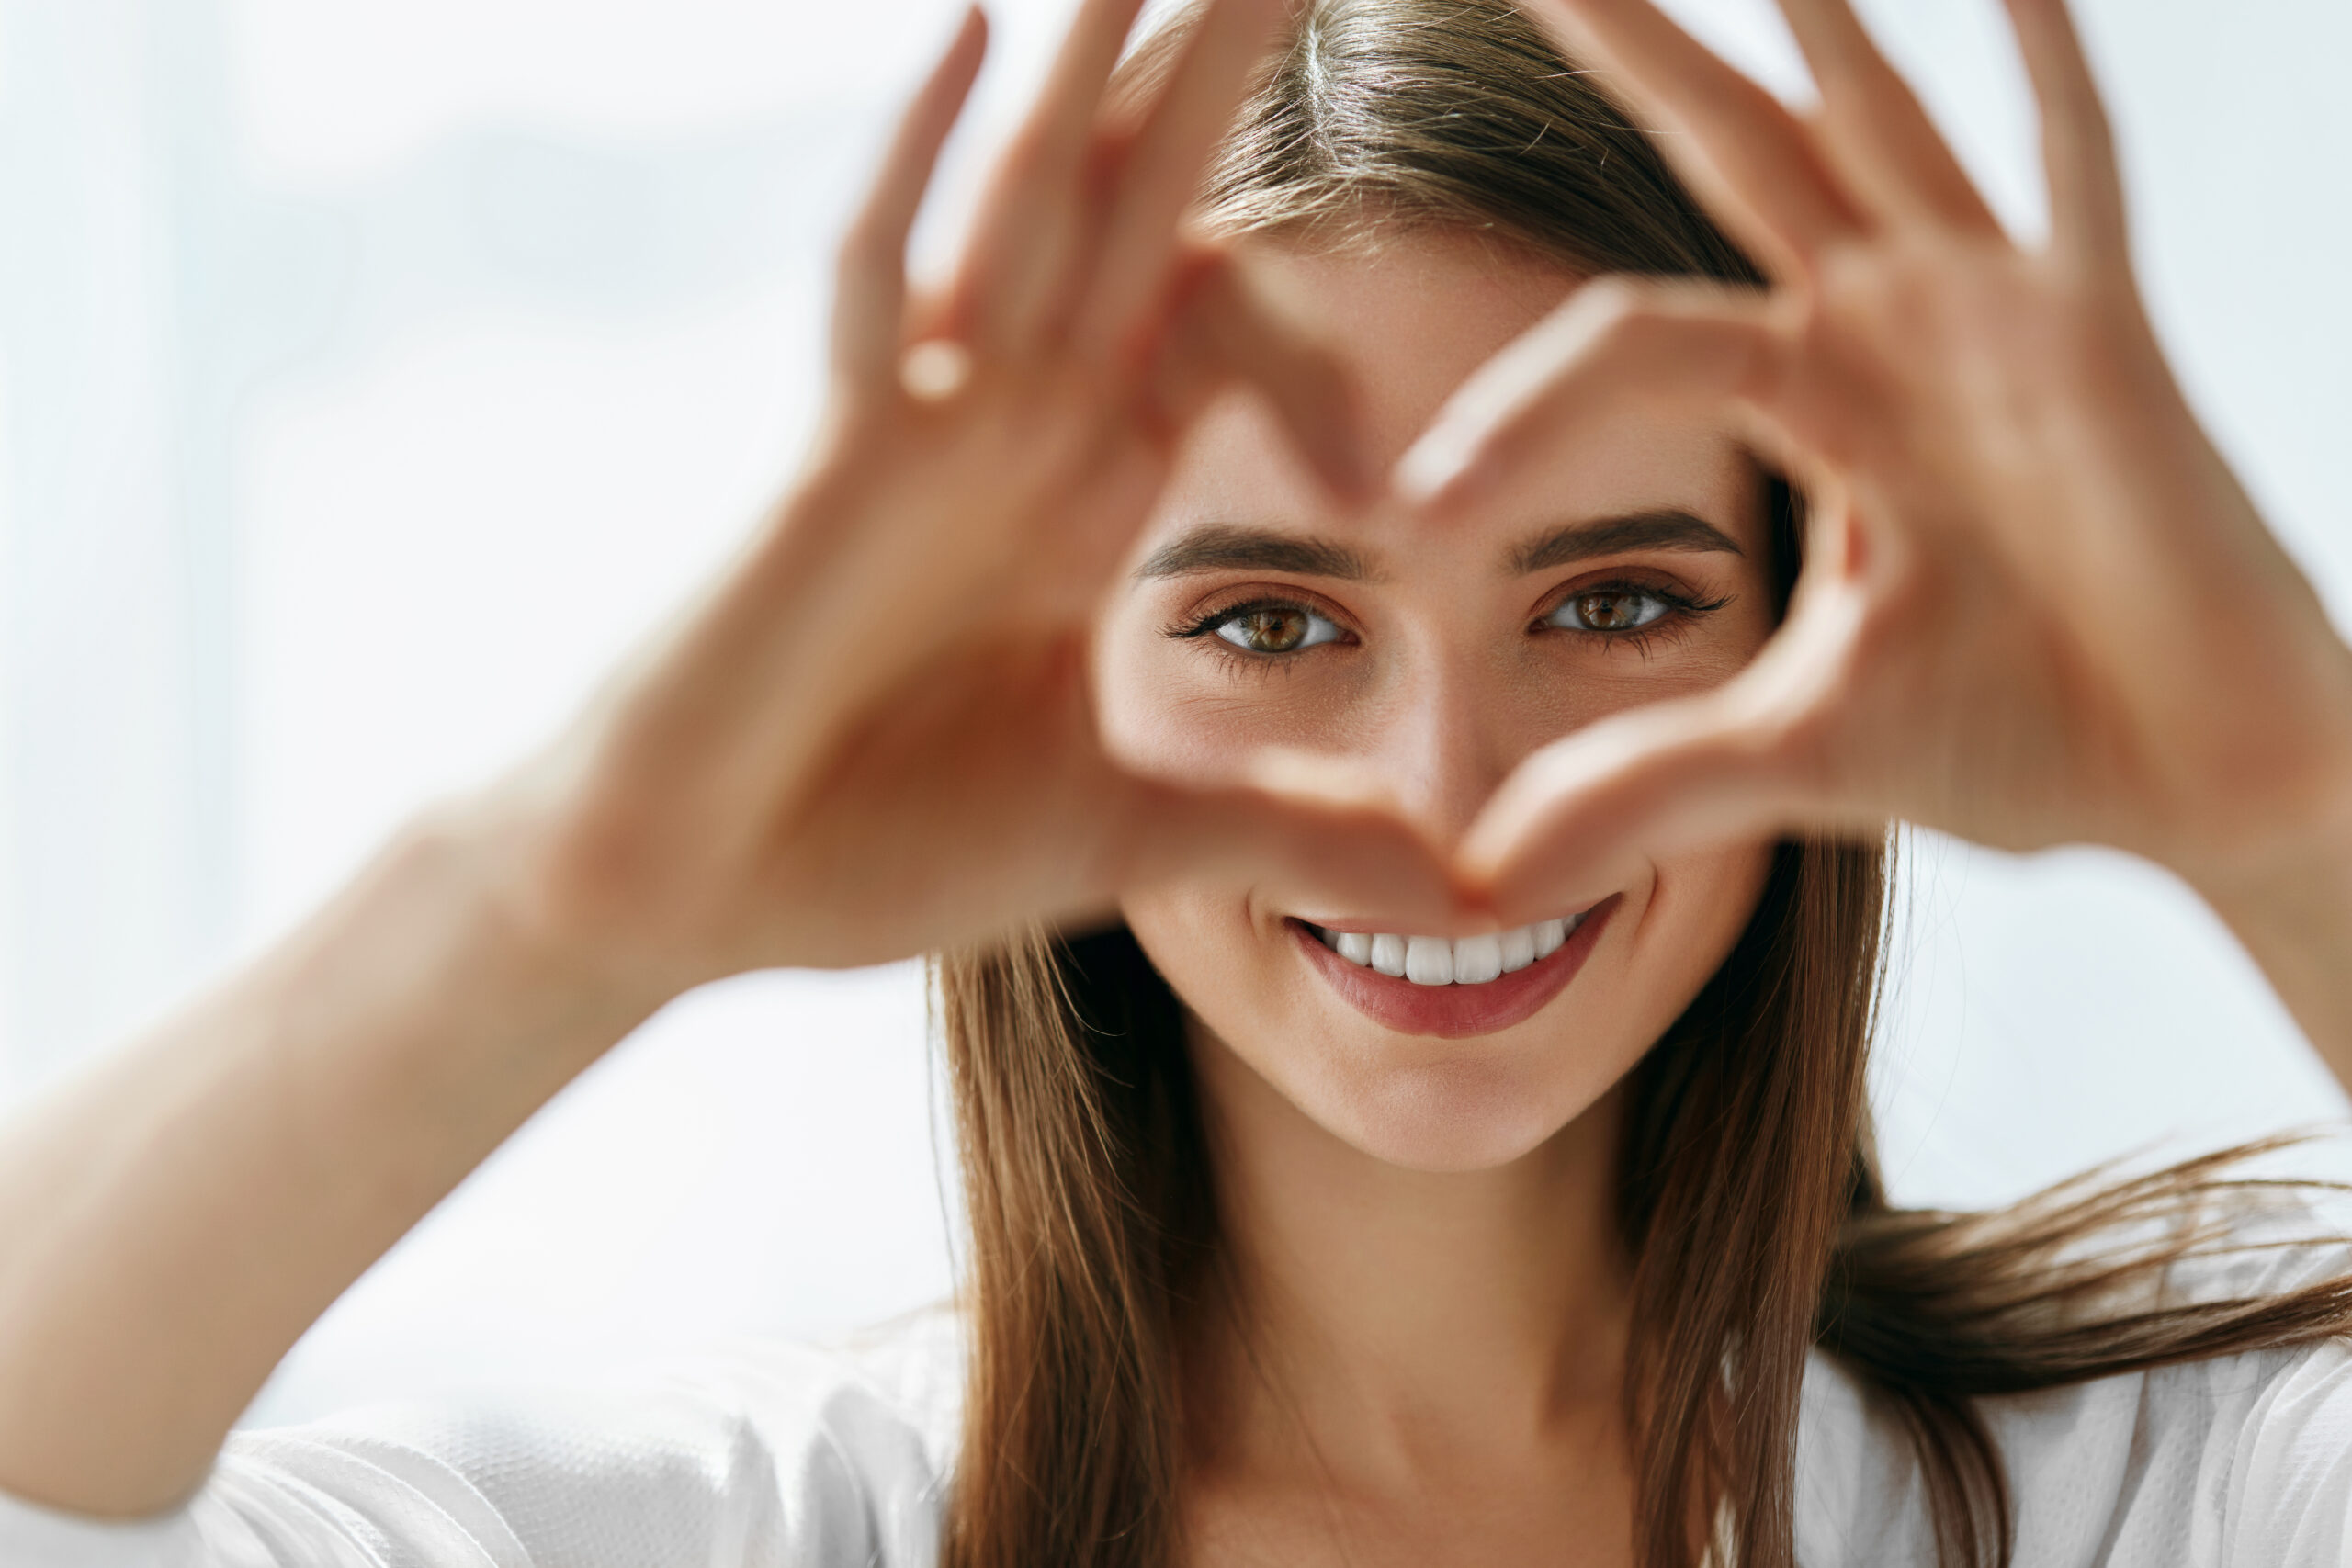 Head shot image of a pretty woman making a heart shape with her hands with her eyes showing through